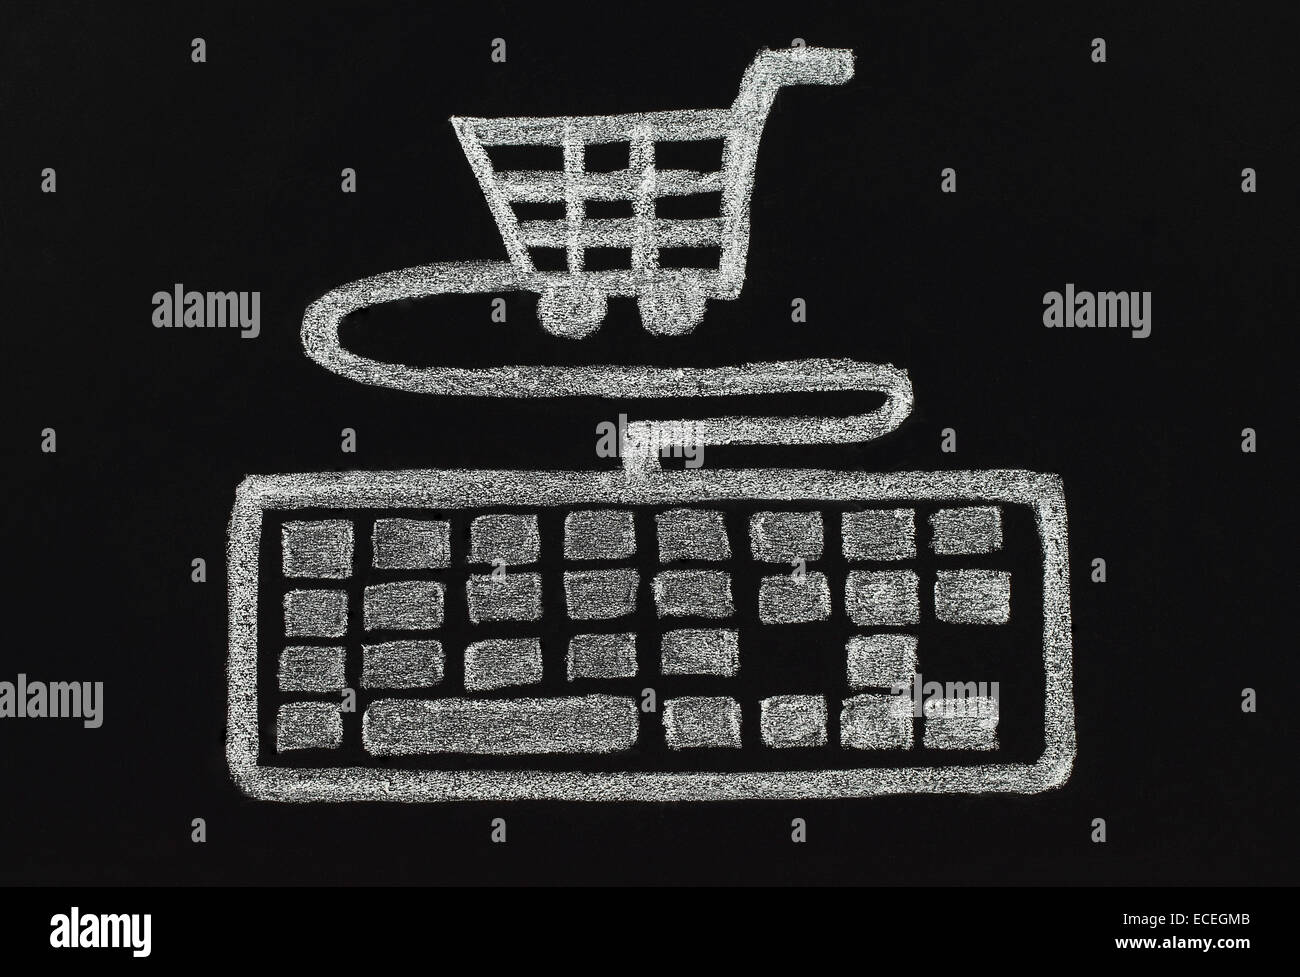 Chalk keyboard connected to cart, shopping concept, drawn by hand not in photoshop Stock Photo